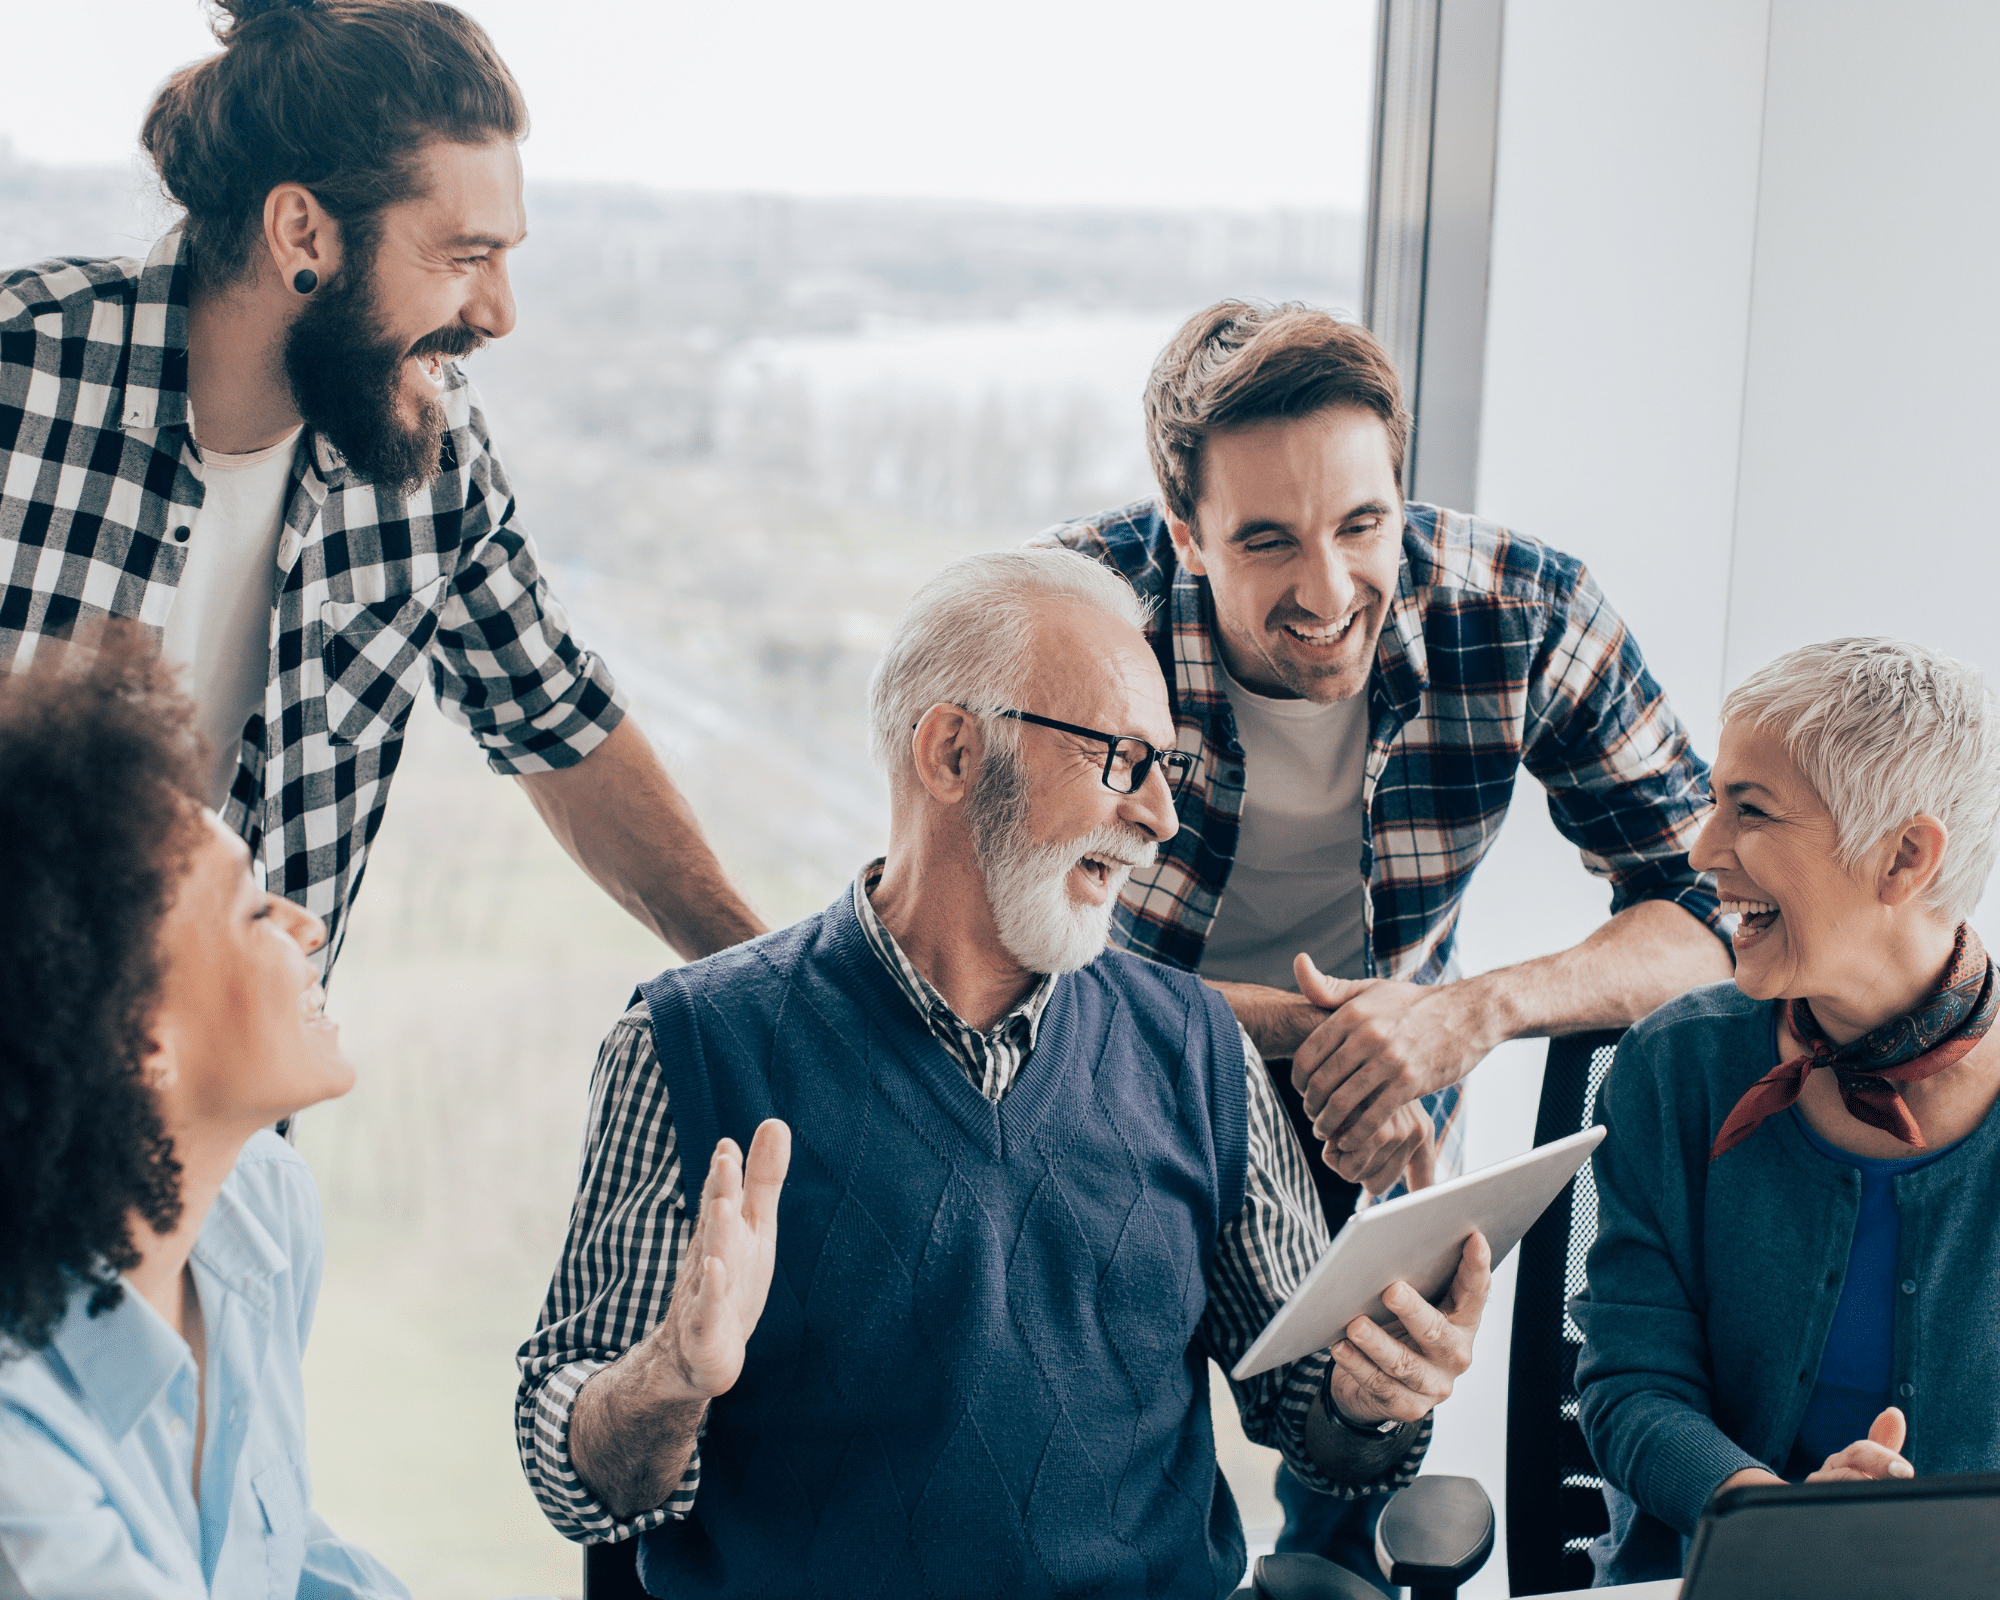 A group of employees from different generations laugh together in the office showing workplace culture can thrive with a focus away from sterotypes